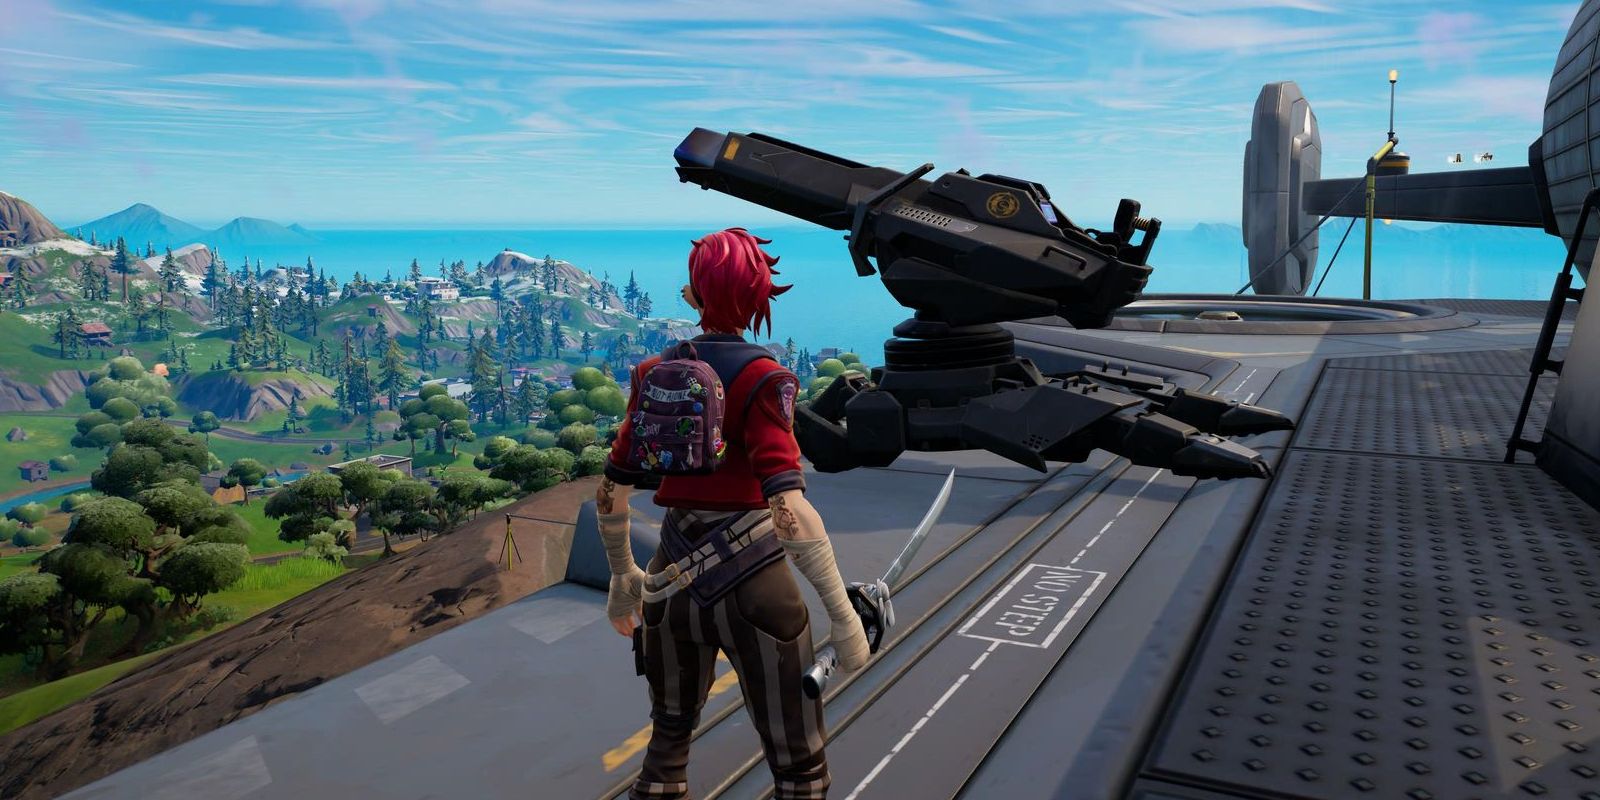 xFortnite Siege Cannon 5.jpgqx87749.pagespeed.ic .zuLiA4Ft4T